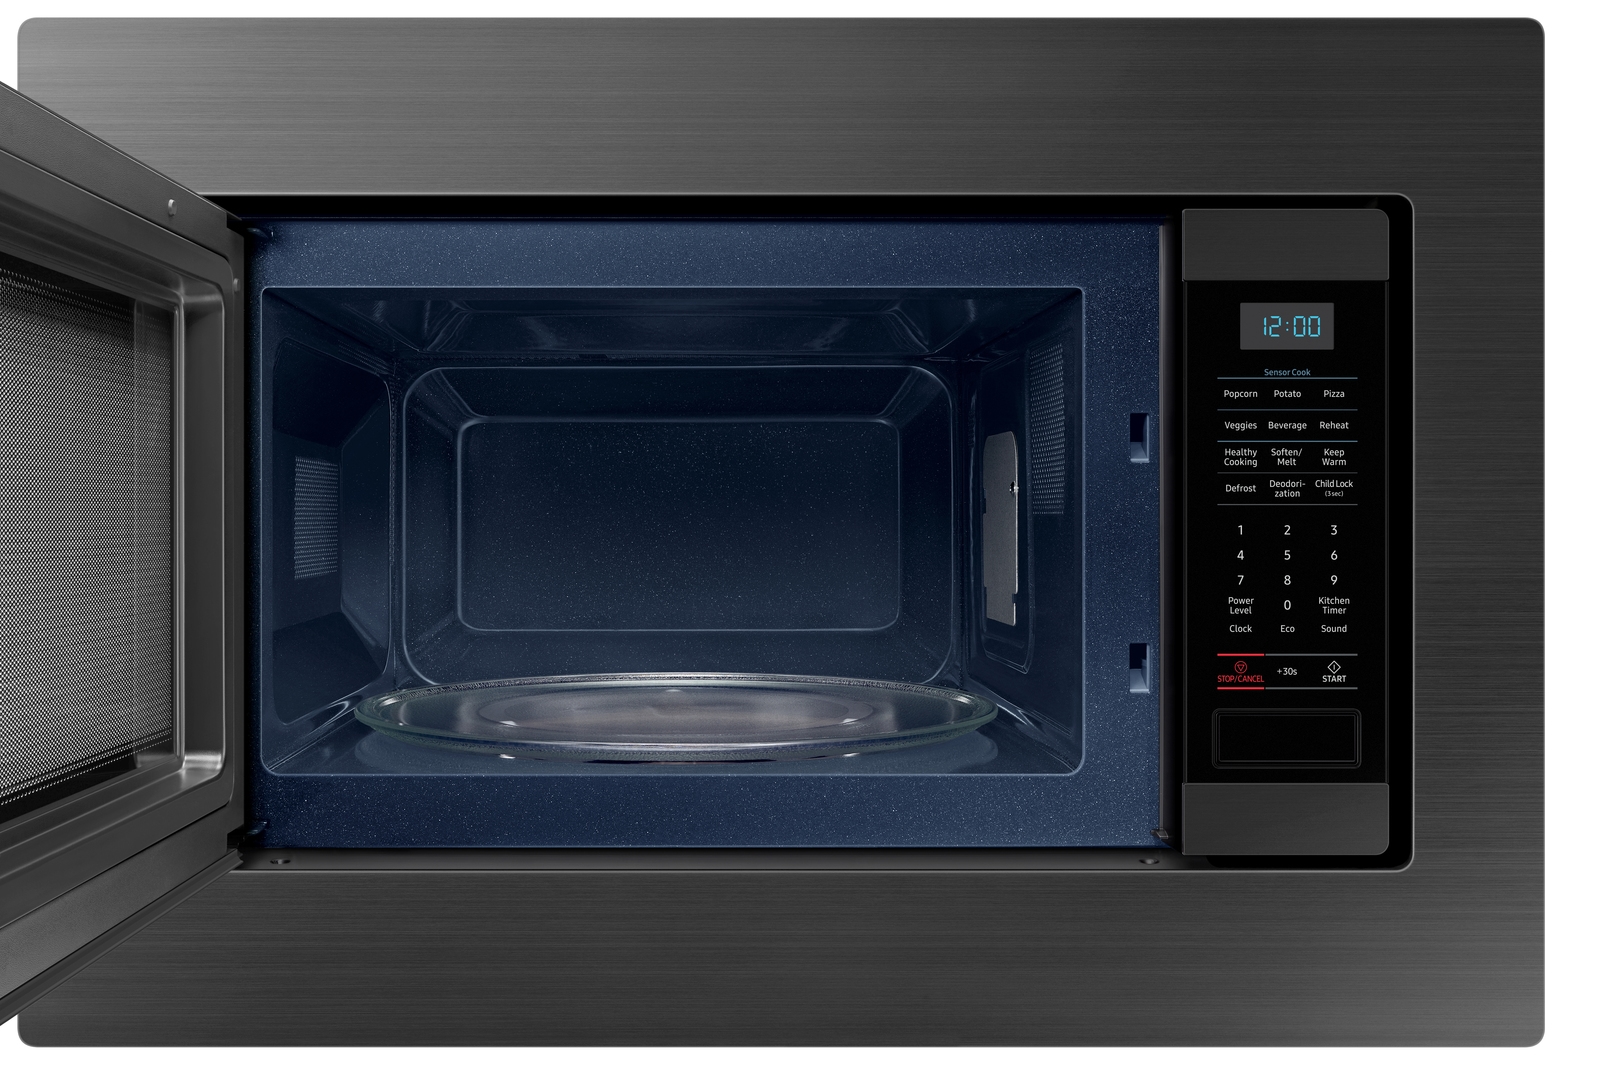 Thumbnail image of 1.9 cu. ft. Countertop Microwave for Built-In Application in Black